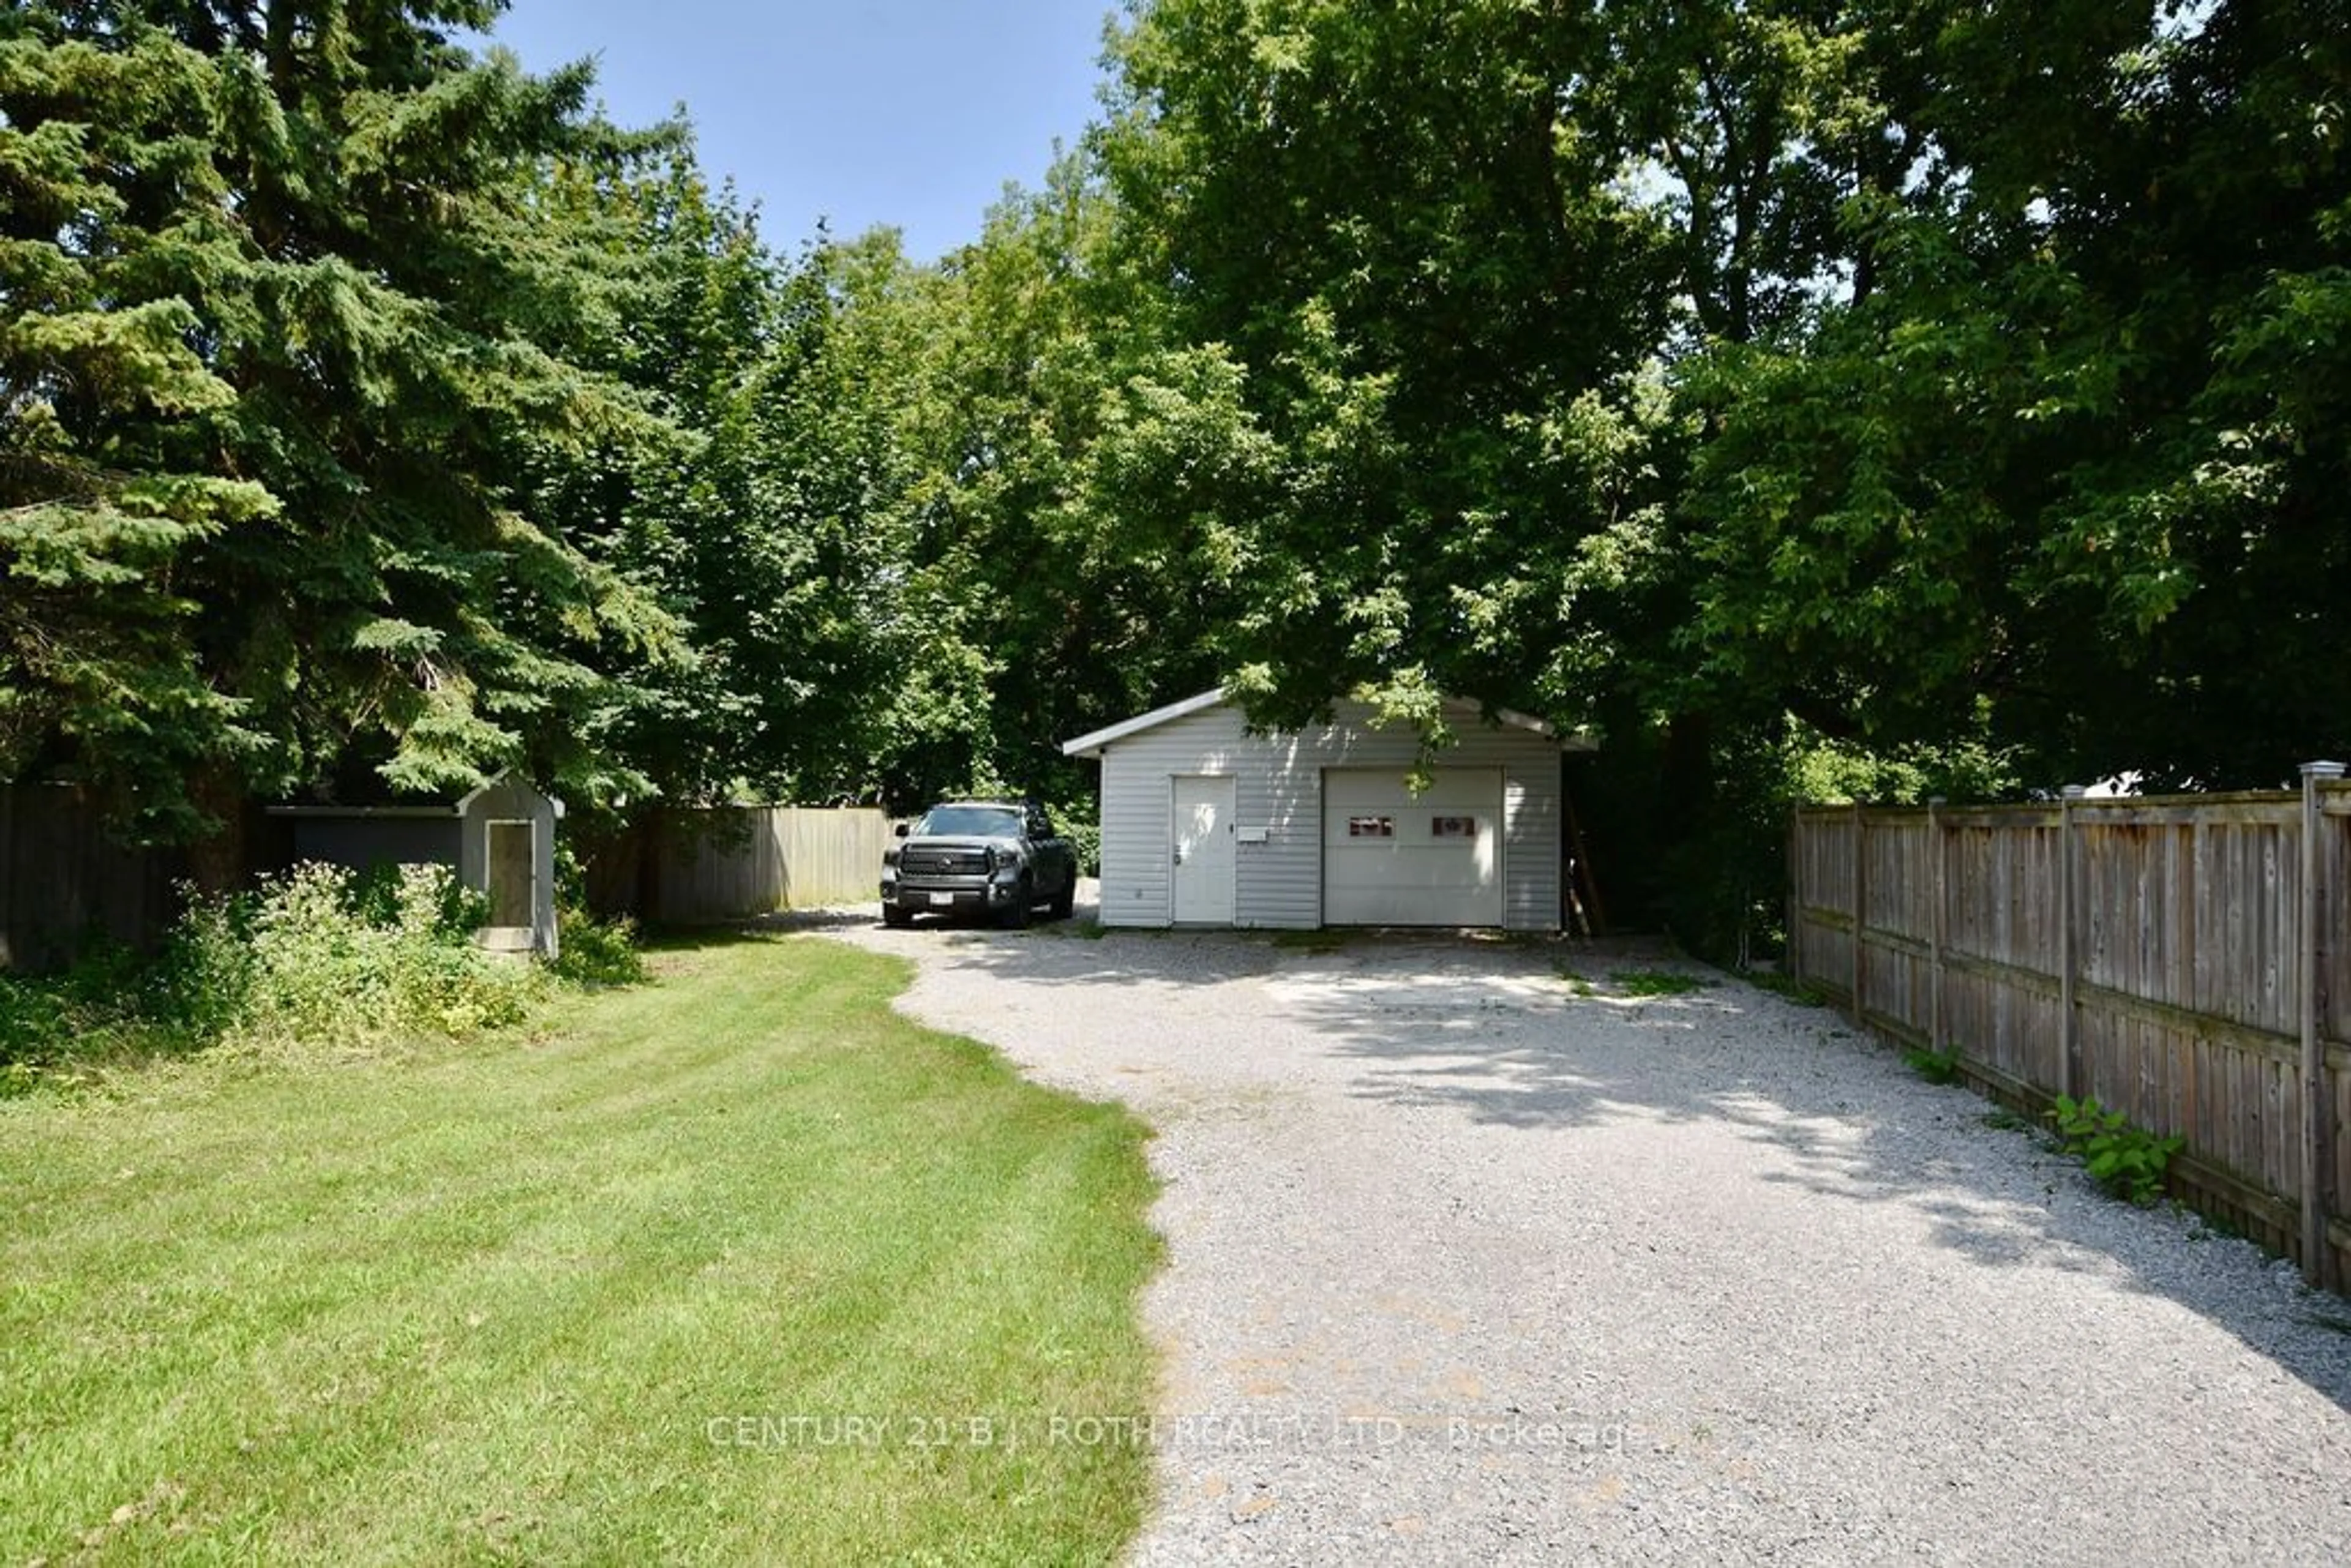 Shed for 68 DUFFERIN St, Orillia Ontario L3V 5S6